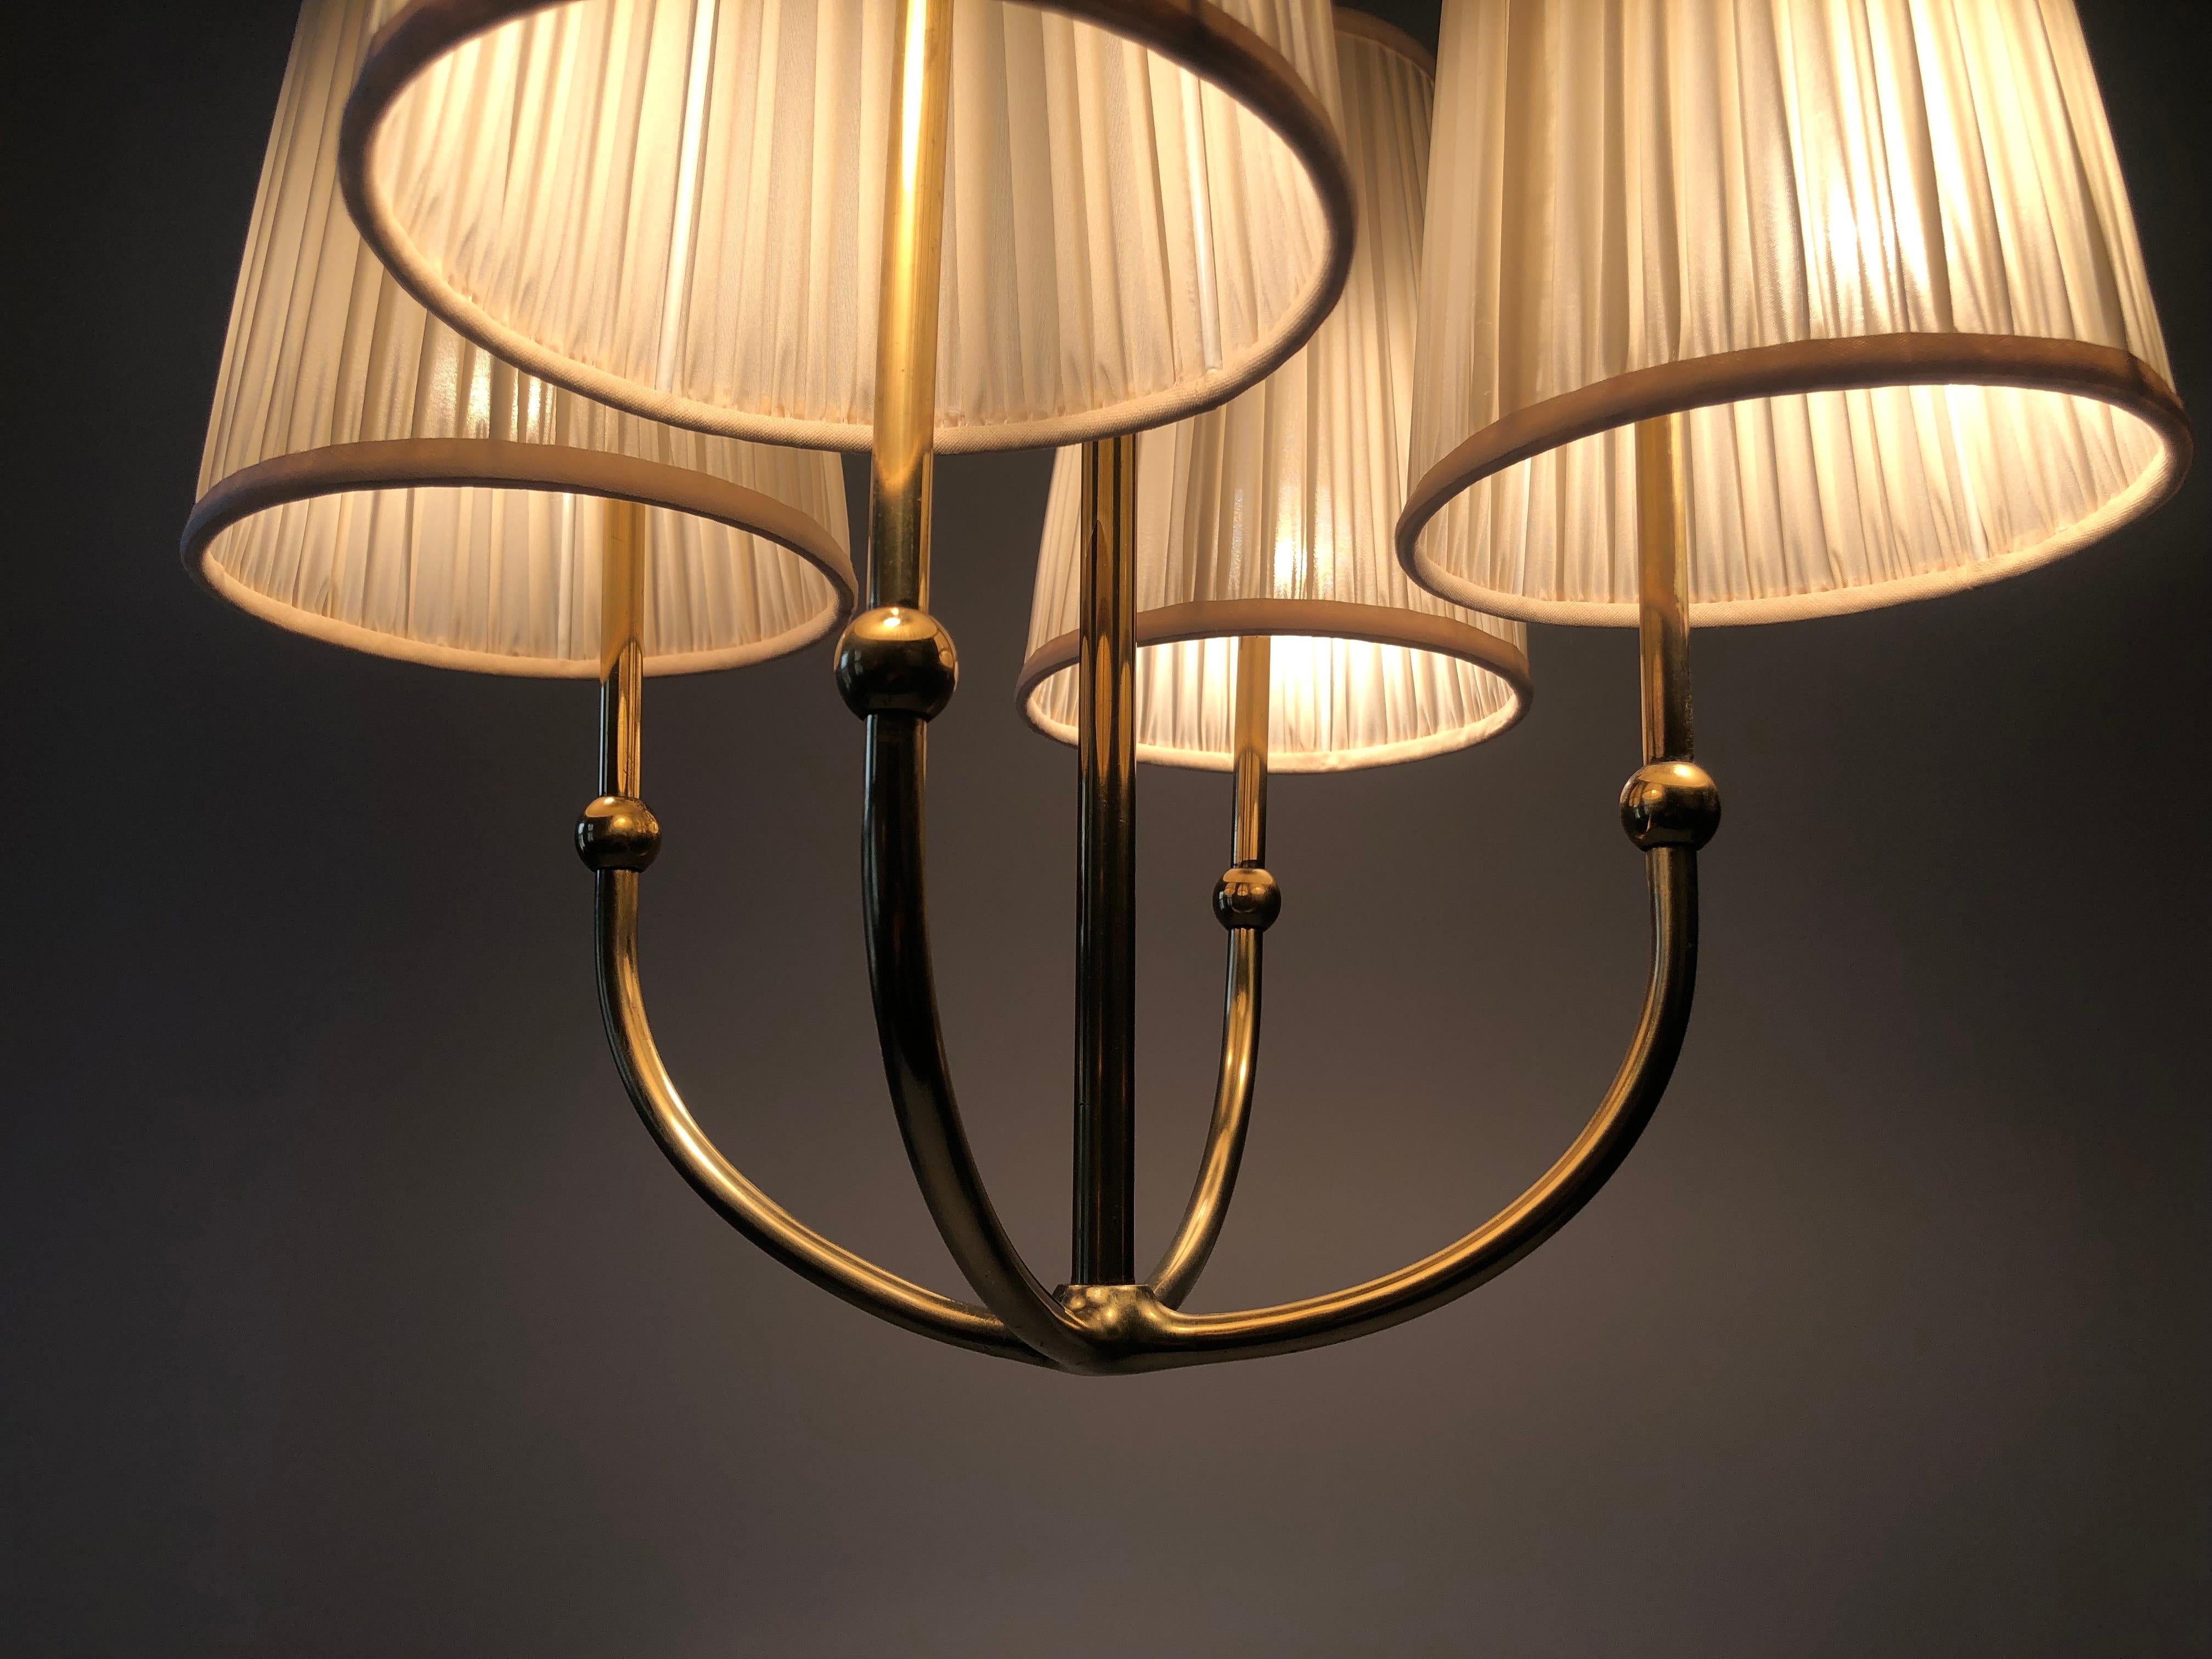 Four Arm Chandelier in Brass with Silk Shades , 1930's, Austria For Sale 4